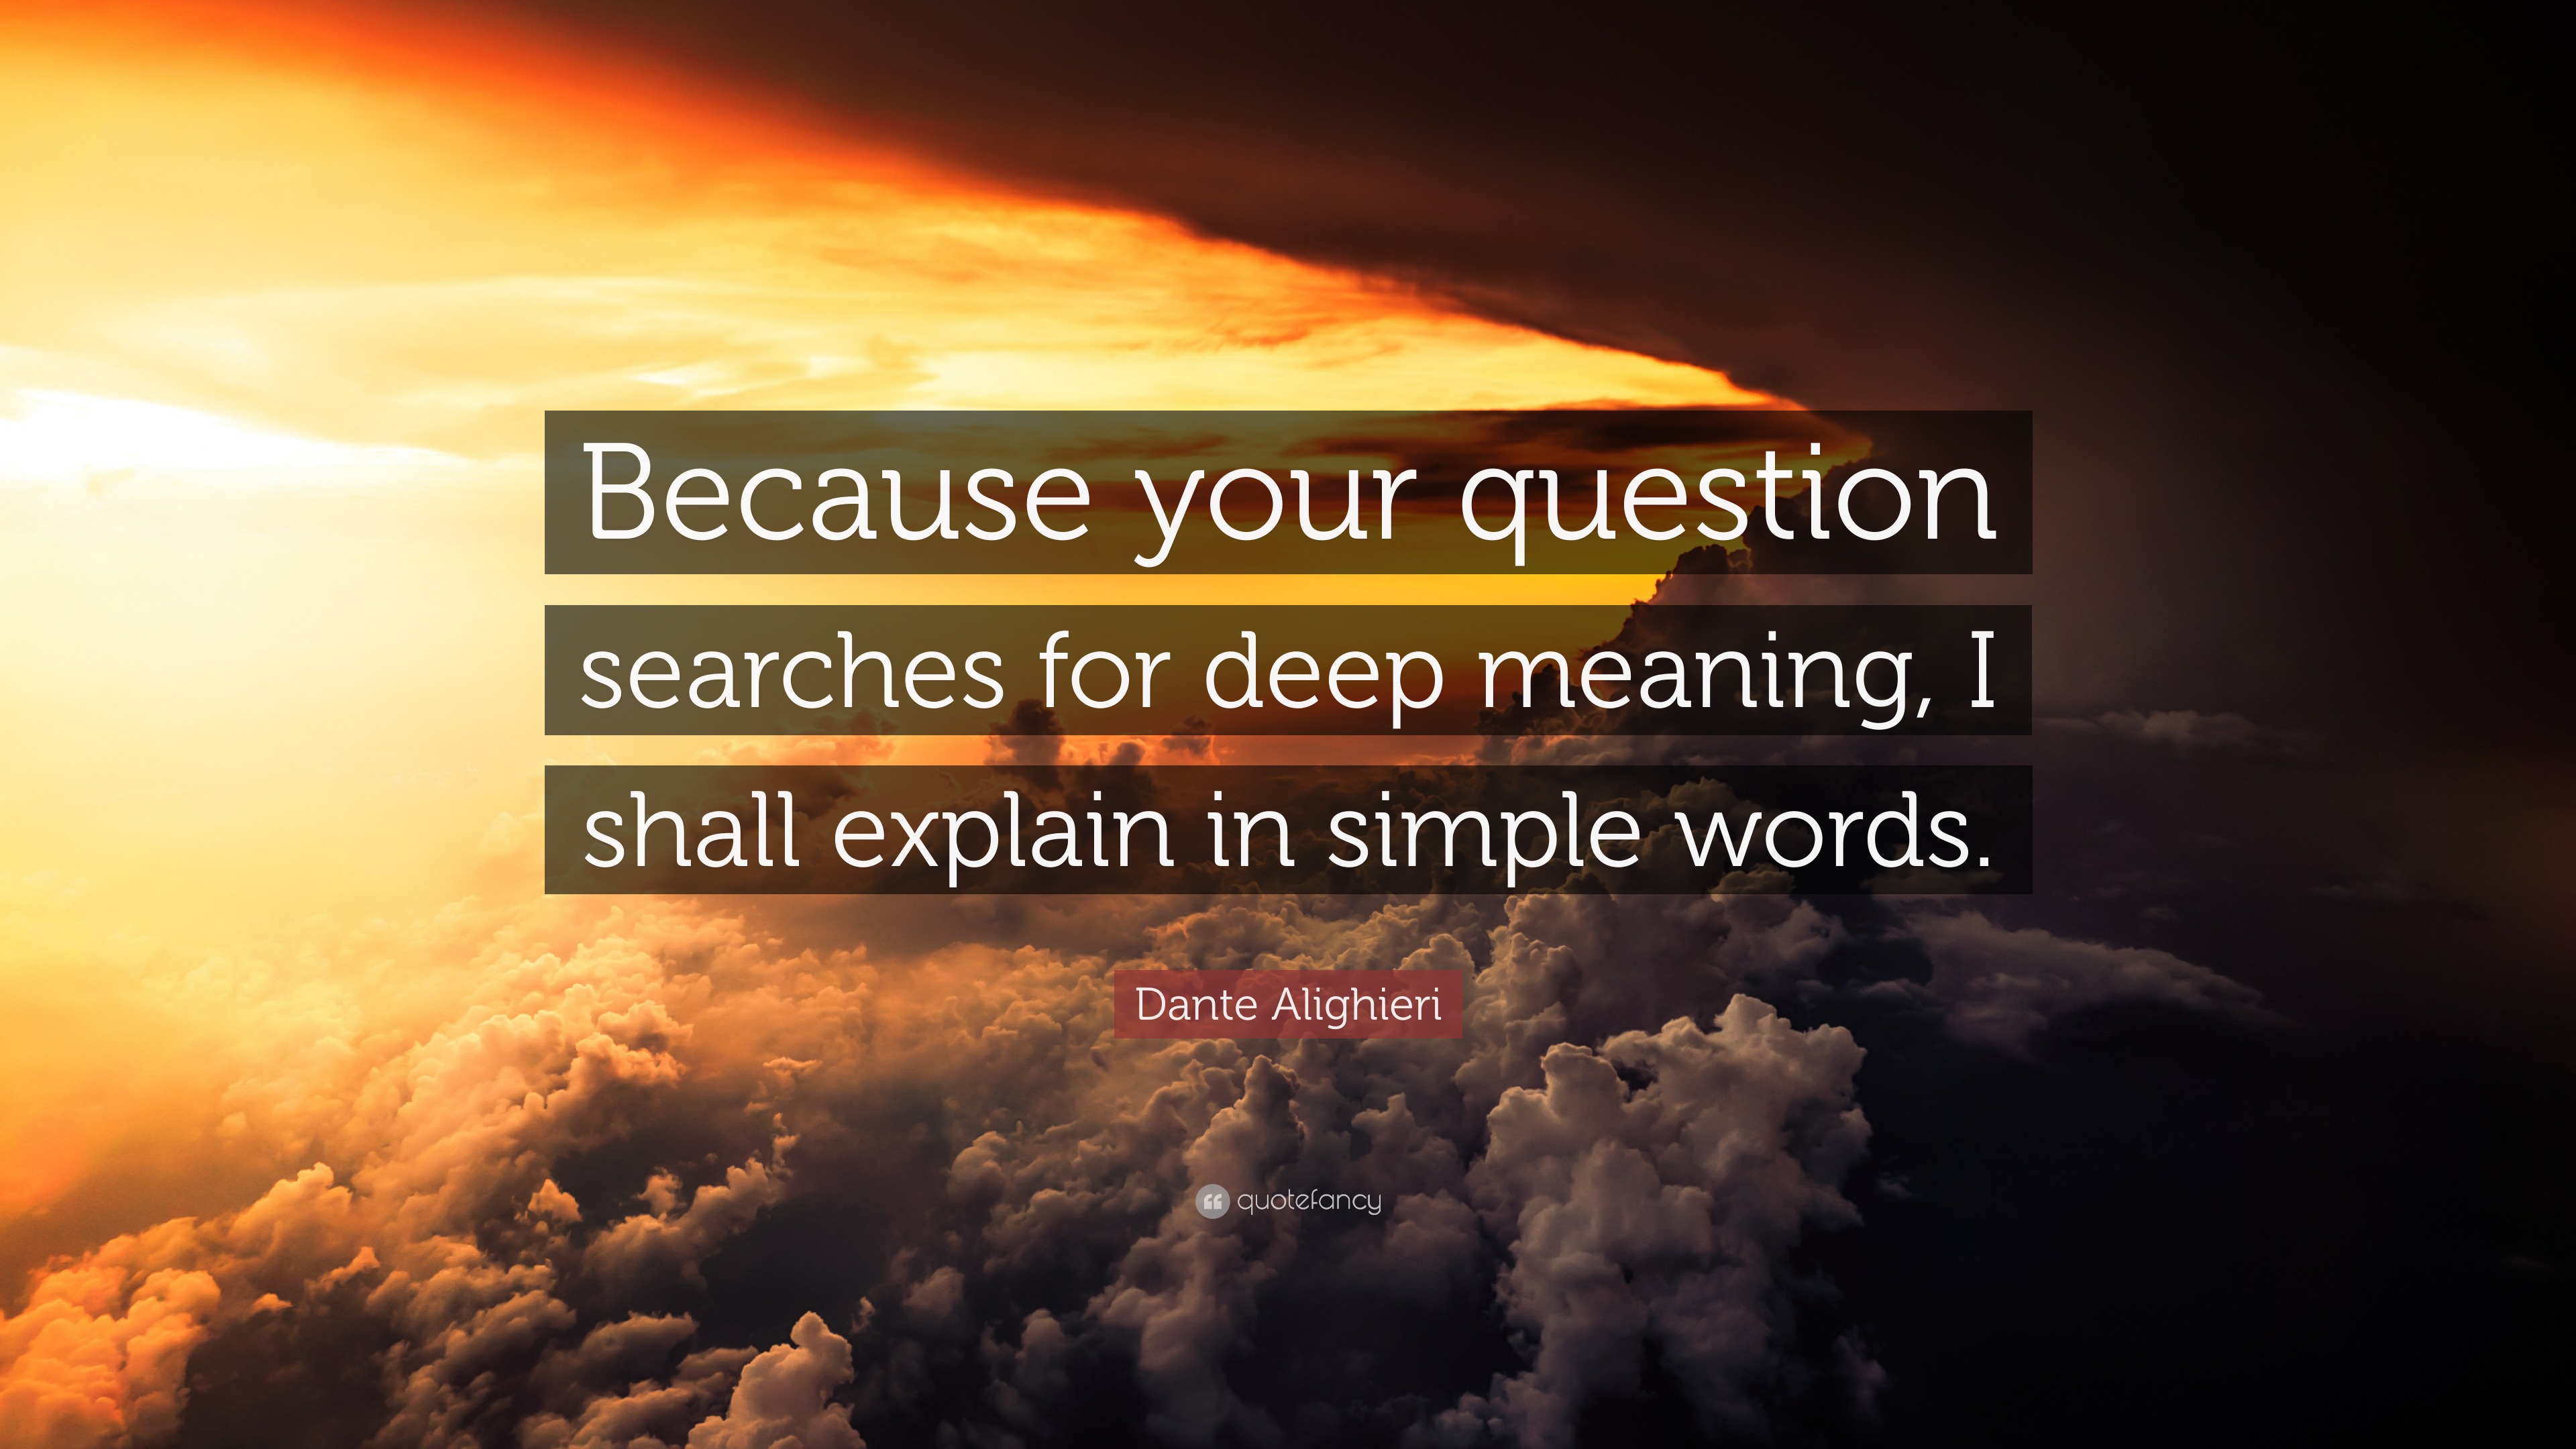 Dante Alighieri Quote: “Because your question searches for deep meaning